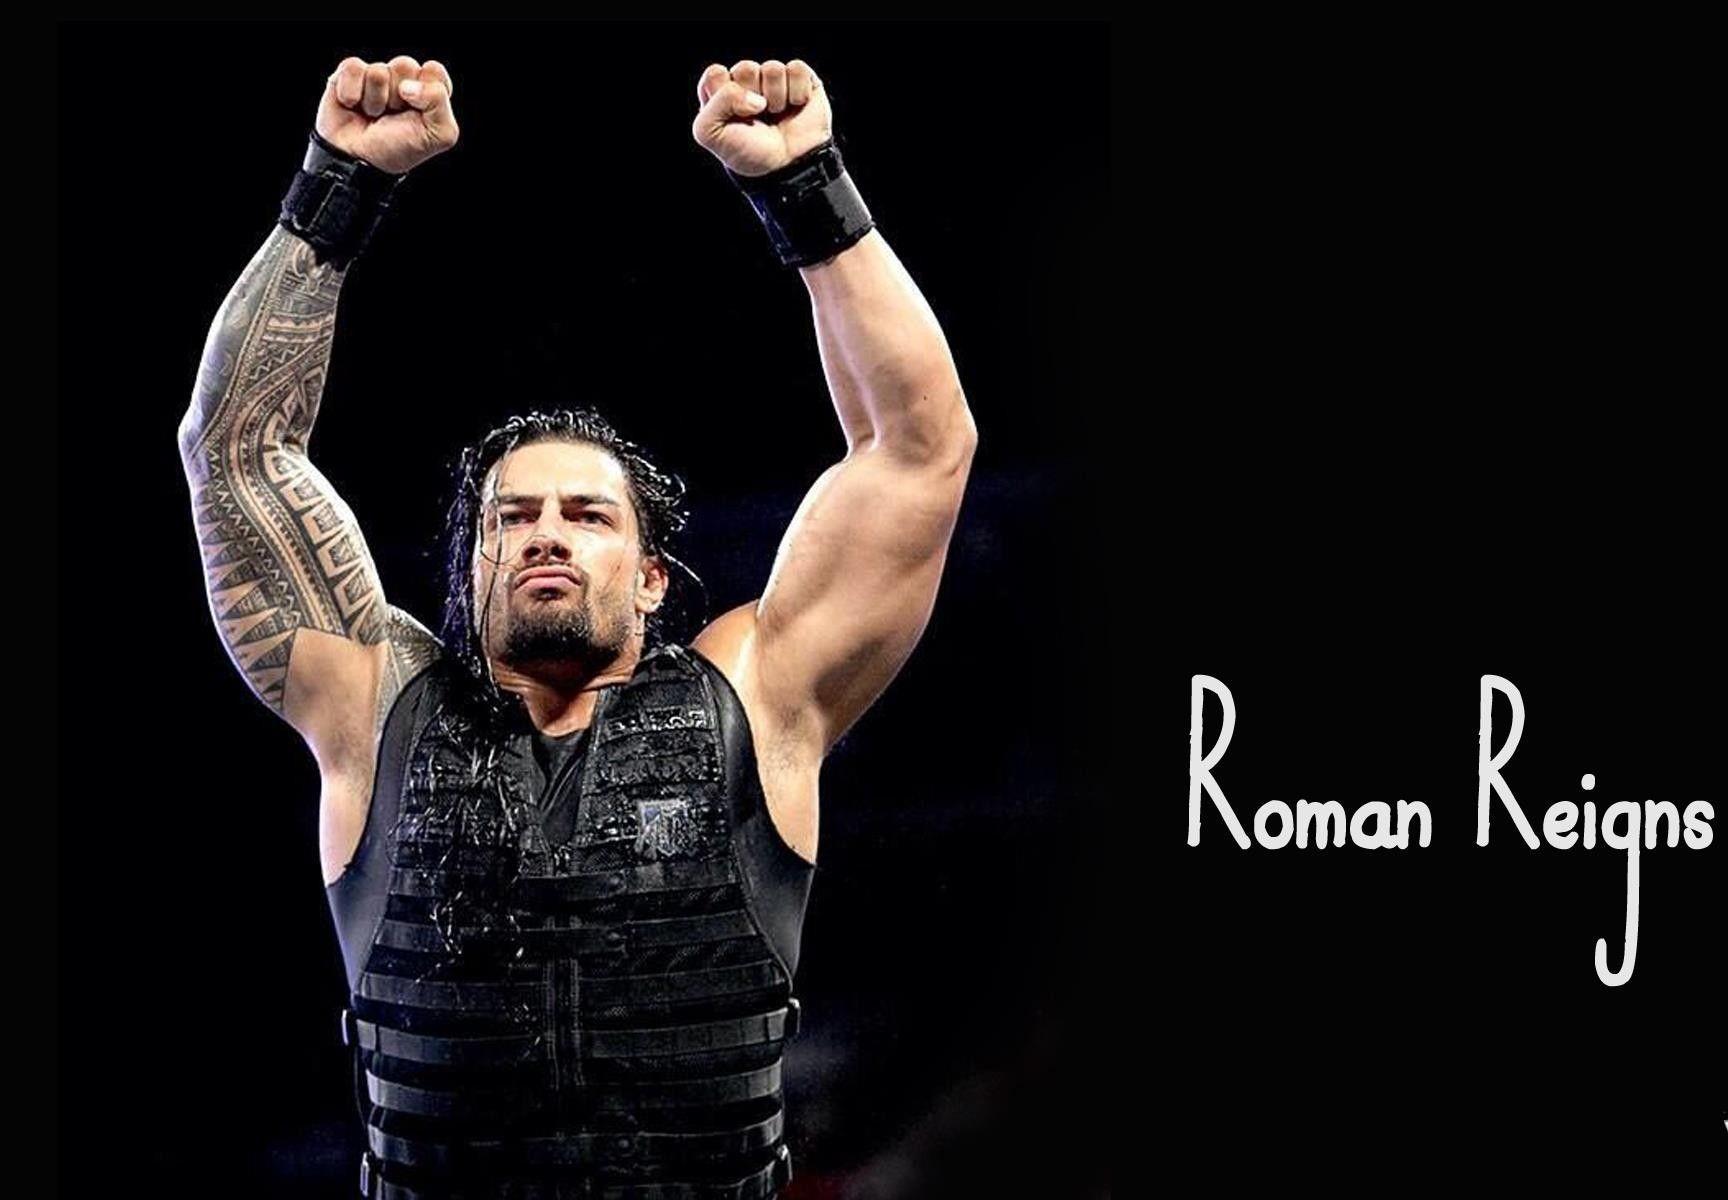 Download wallpapers Roman Reigns 4k american wrestlers WWE wrestling  neon lights Leati Joseph Anoai wrestlers Roman Reigns 4K for desktop  with resolution 3840x2400 High Quality HD pictures wallpapers